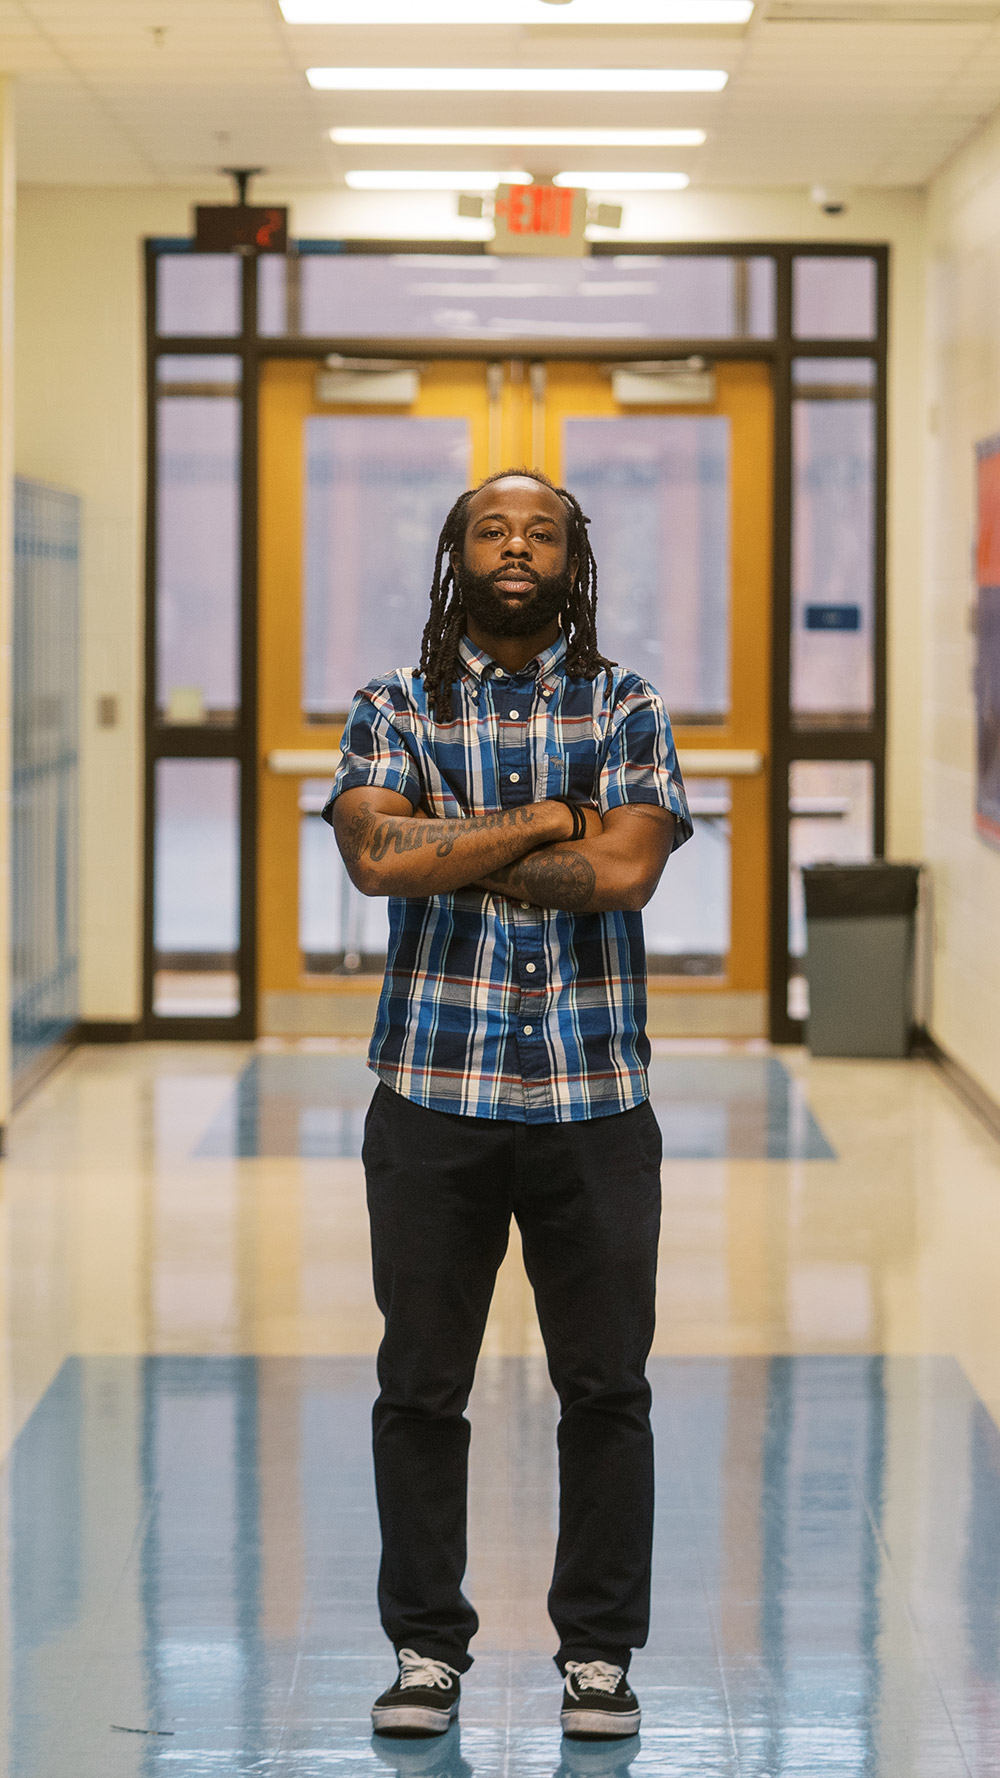 Anthony, a teacher profiled in this blog, stands in the middle of his school's hallway